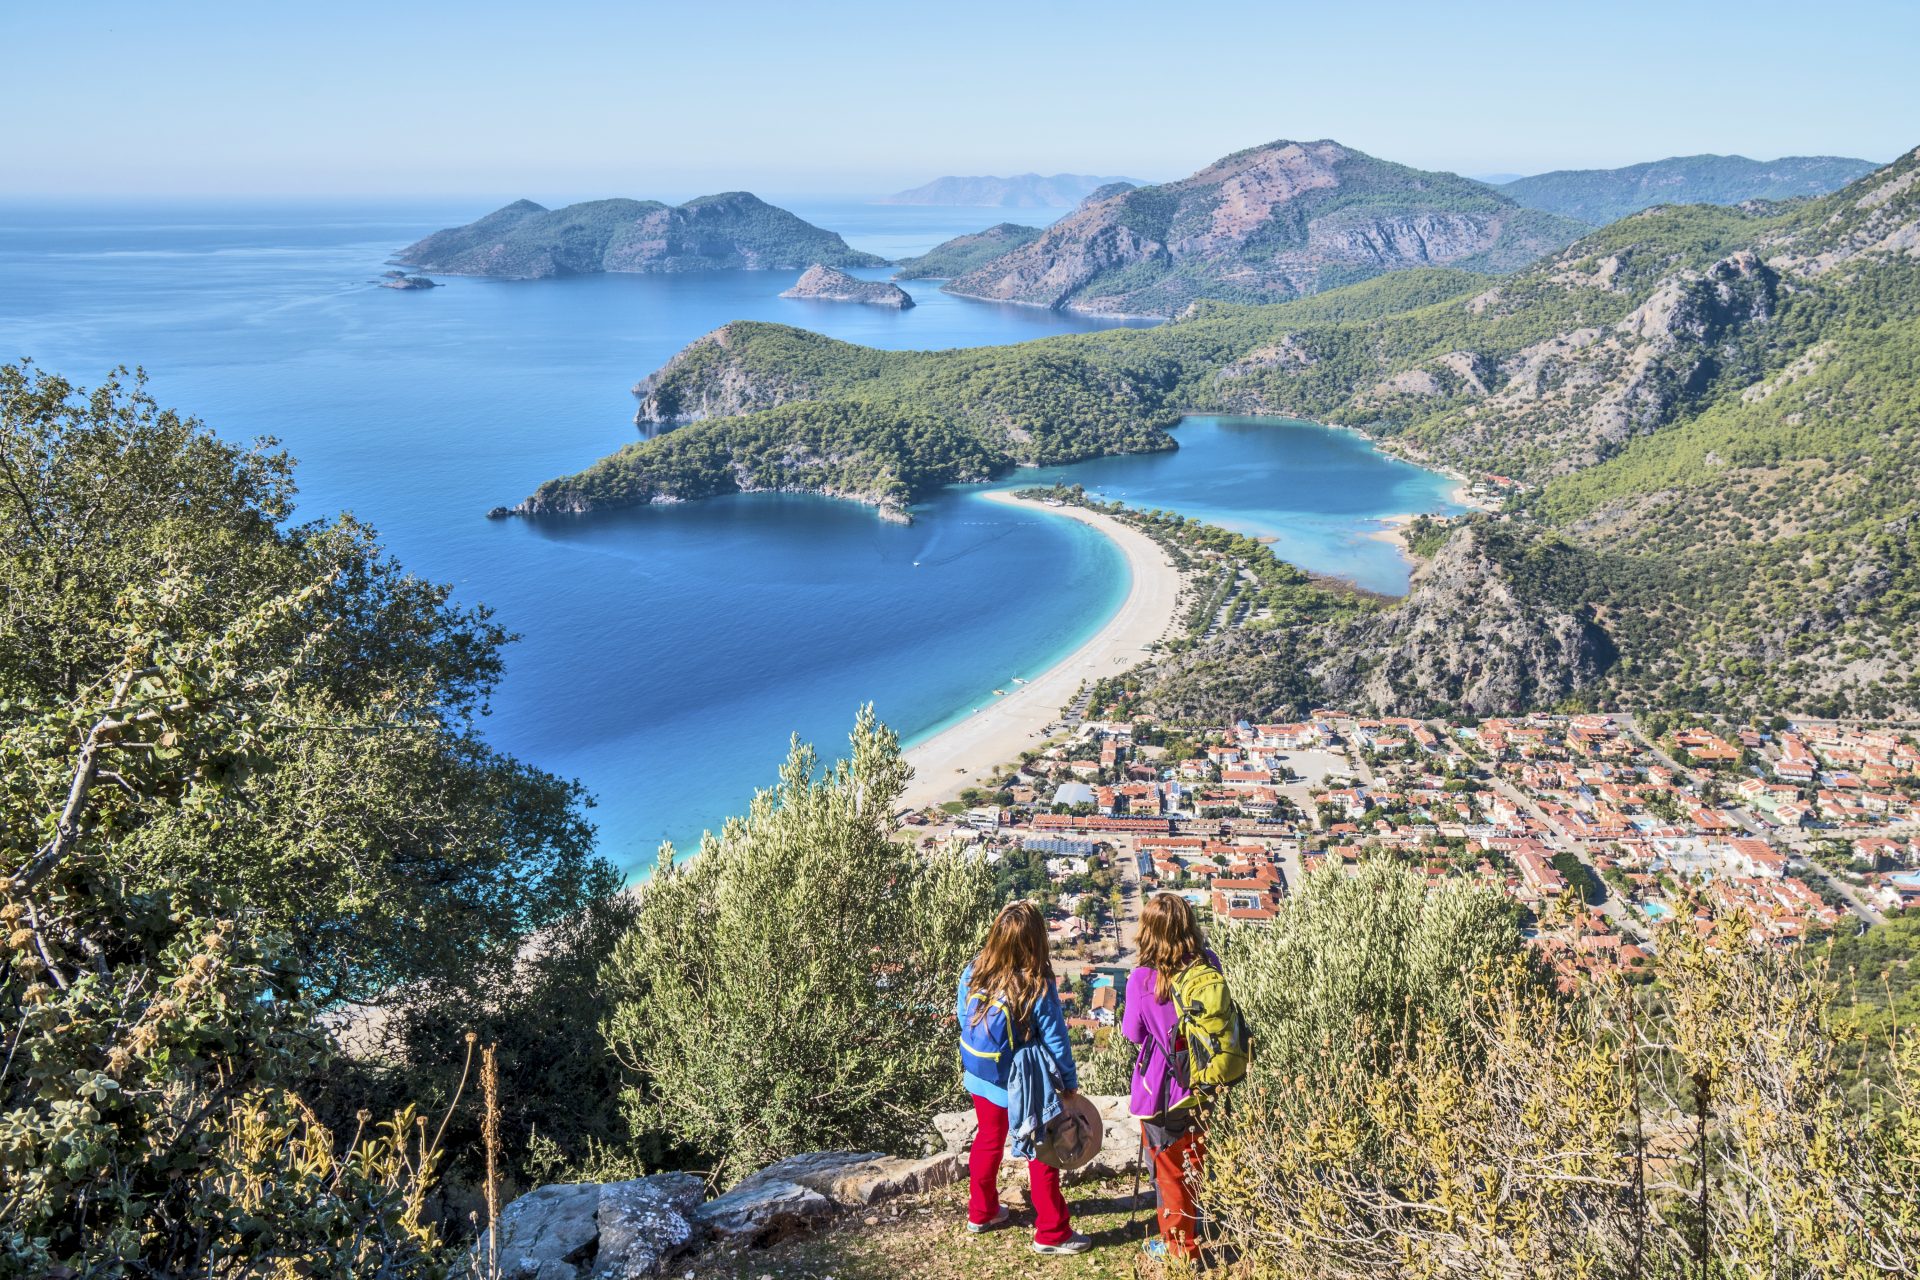 <p>A must for hikers, this trail is one of the most famous long-distance hiking trails in Turkey and the world. It offers spectacular views of the coast, ancient ruins, and diverse landscapes. Located along the Mediterranean coast of Turkey, the trail stretches approximately 540 kilometers (335 miles) from Ölüdeniz in the west to Geyikbayırı in the east. The route passes through the ancient region of Lycia, known for its rich history and scenic beauty.</p>